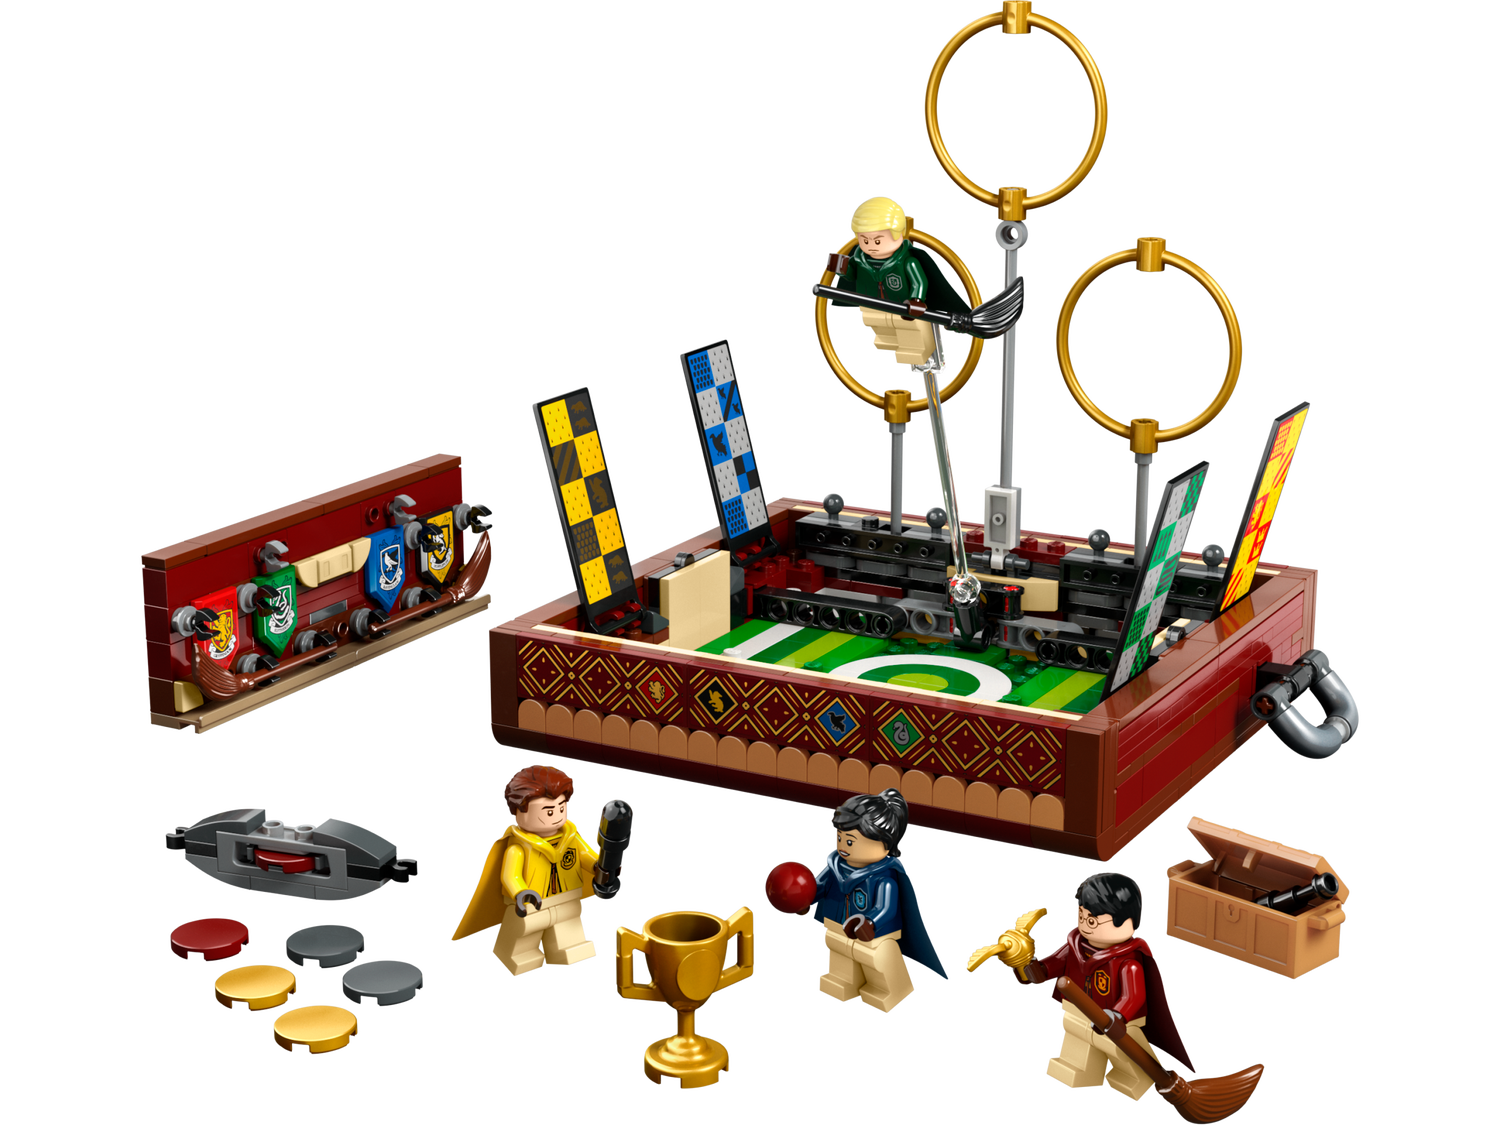 Lego Harry Potter Quidditch Trunk 76416 - Albagame